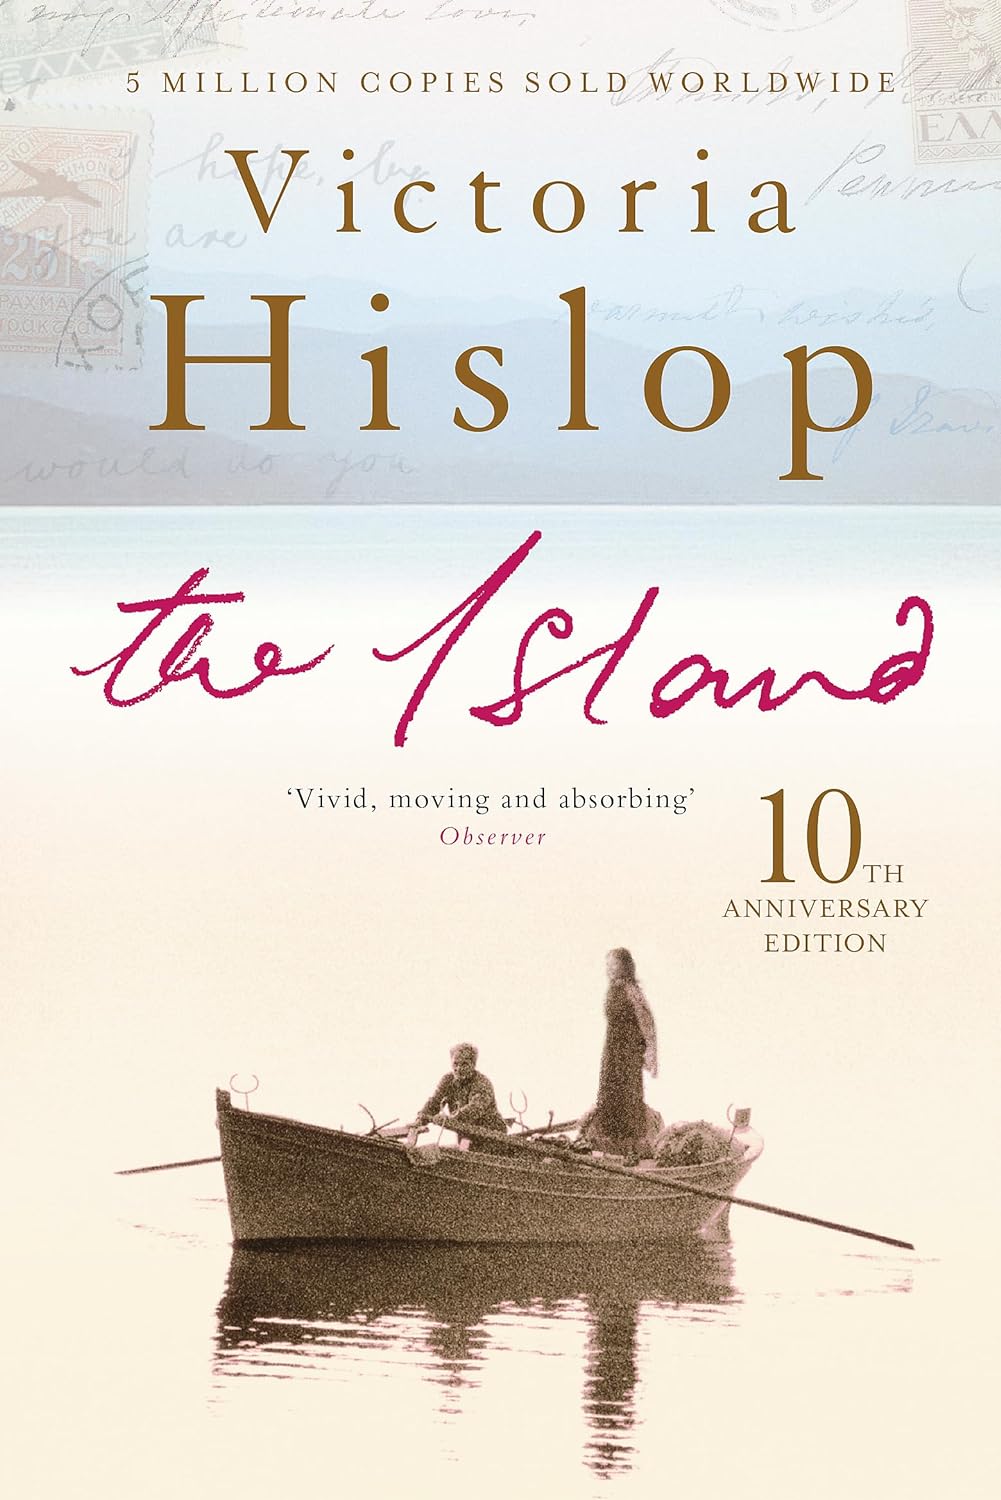 The front cover of The Island. Two people are in a rowing boat, one rowing and the other standing up. the background is a pale brown colour with pale blue above, unclear where the water ends and h=the sky starts.